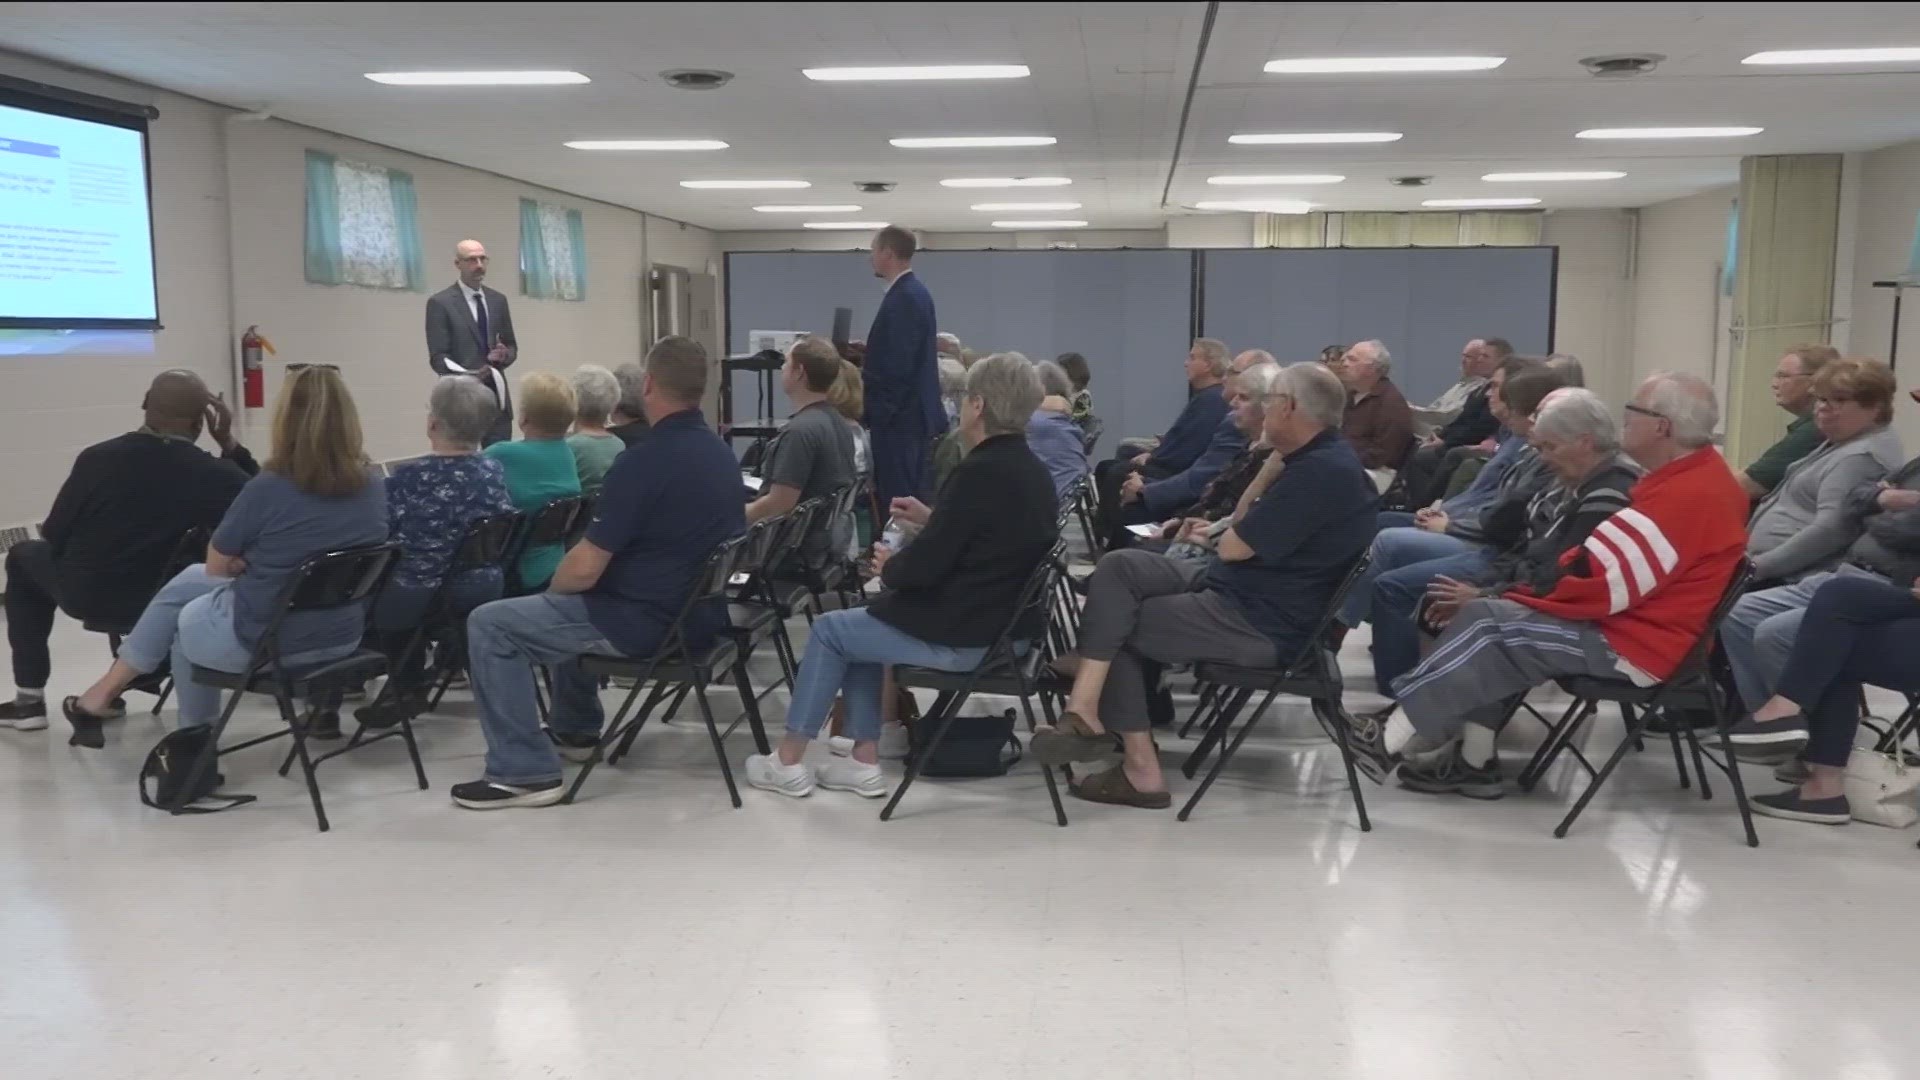 "This is a privilege that we don't take lightly," Mercy Health President Bob Baxter said Tuesday at the first of two public forums on the hospital's future.